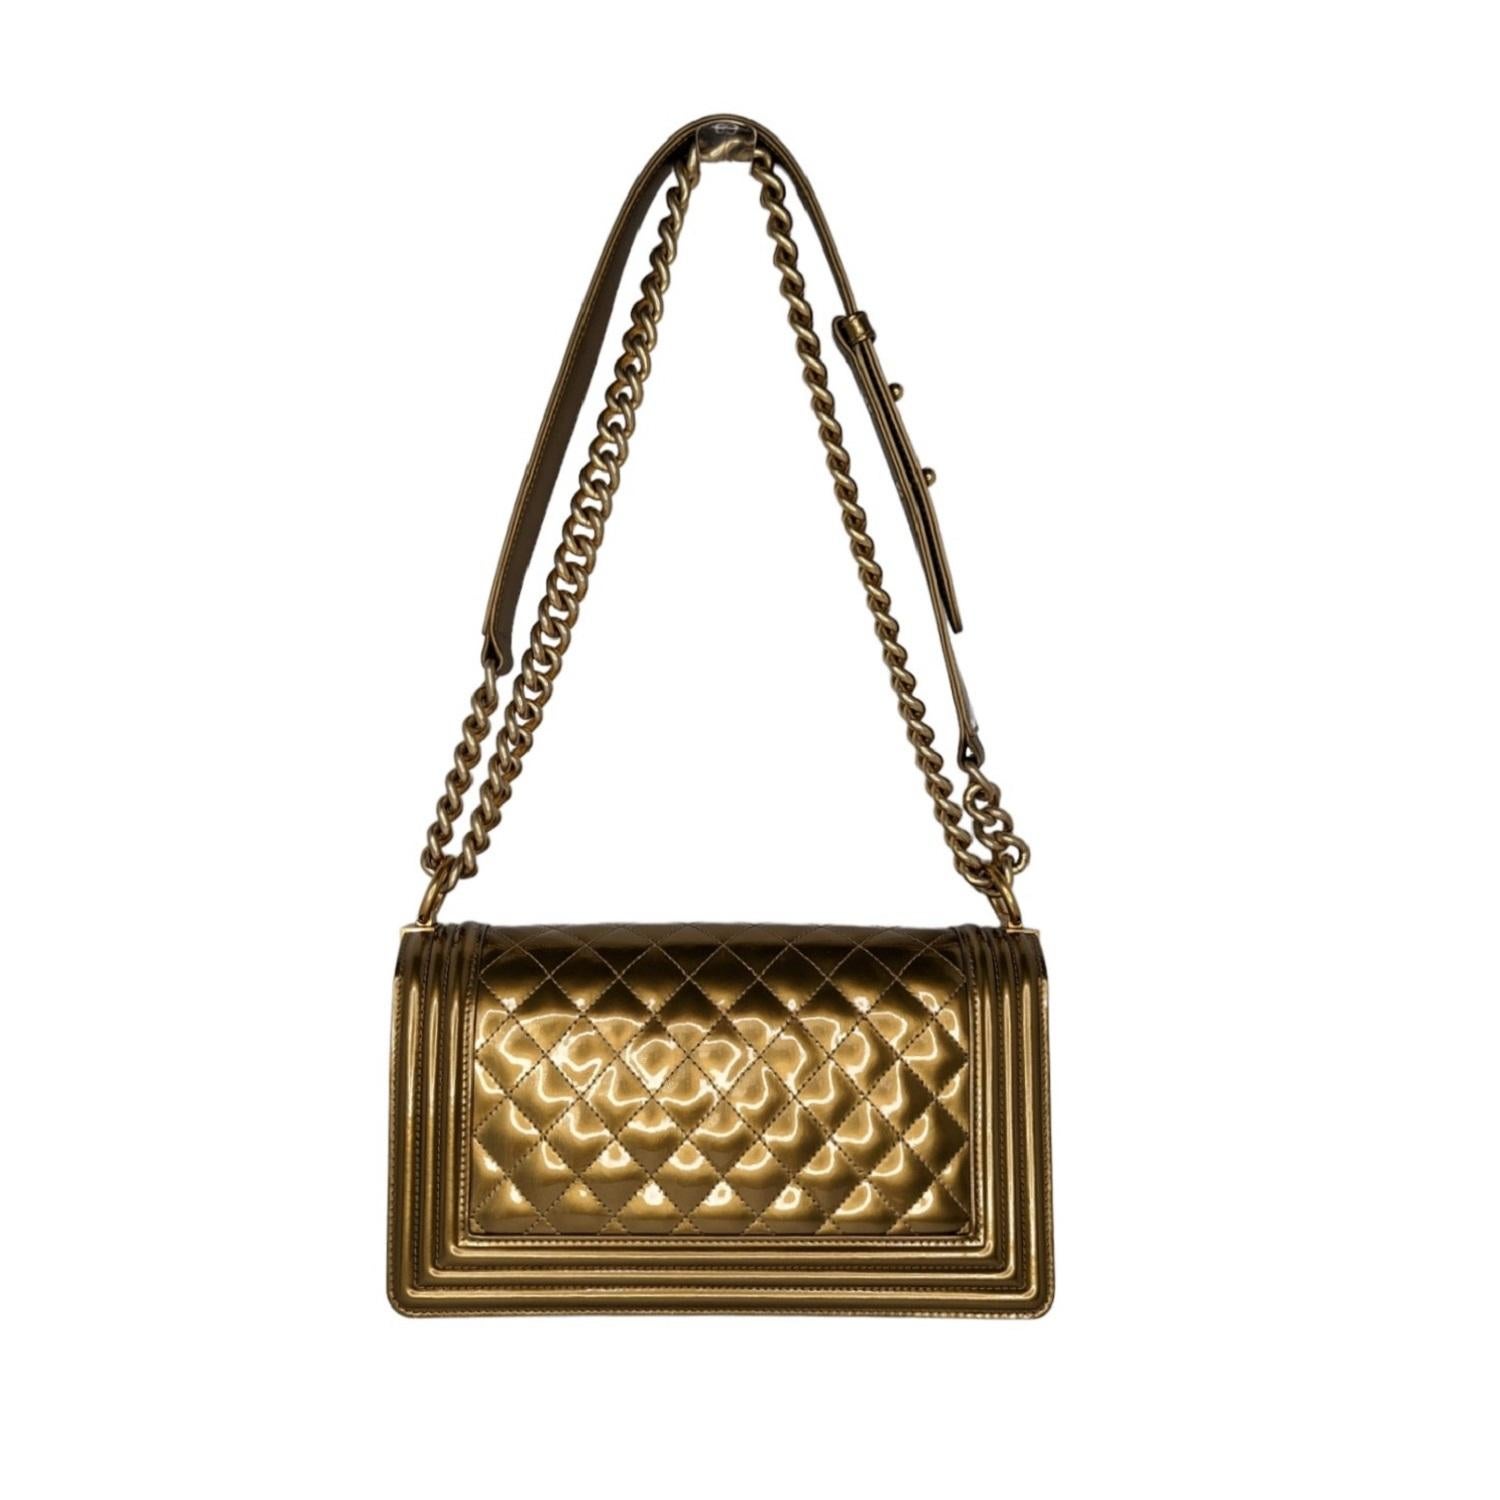 This stylish shoulder bag in the larger size is crafted of glossy patent leather in gold framed by a linear quilting. The bag features a polished gold tone chain link shoulder strap with a leather shoulder pad and a unique squared polished gold tone